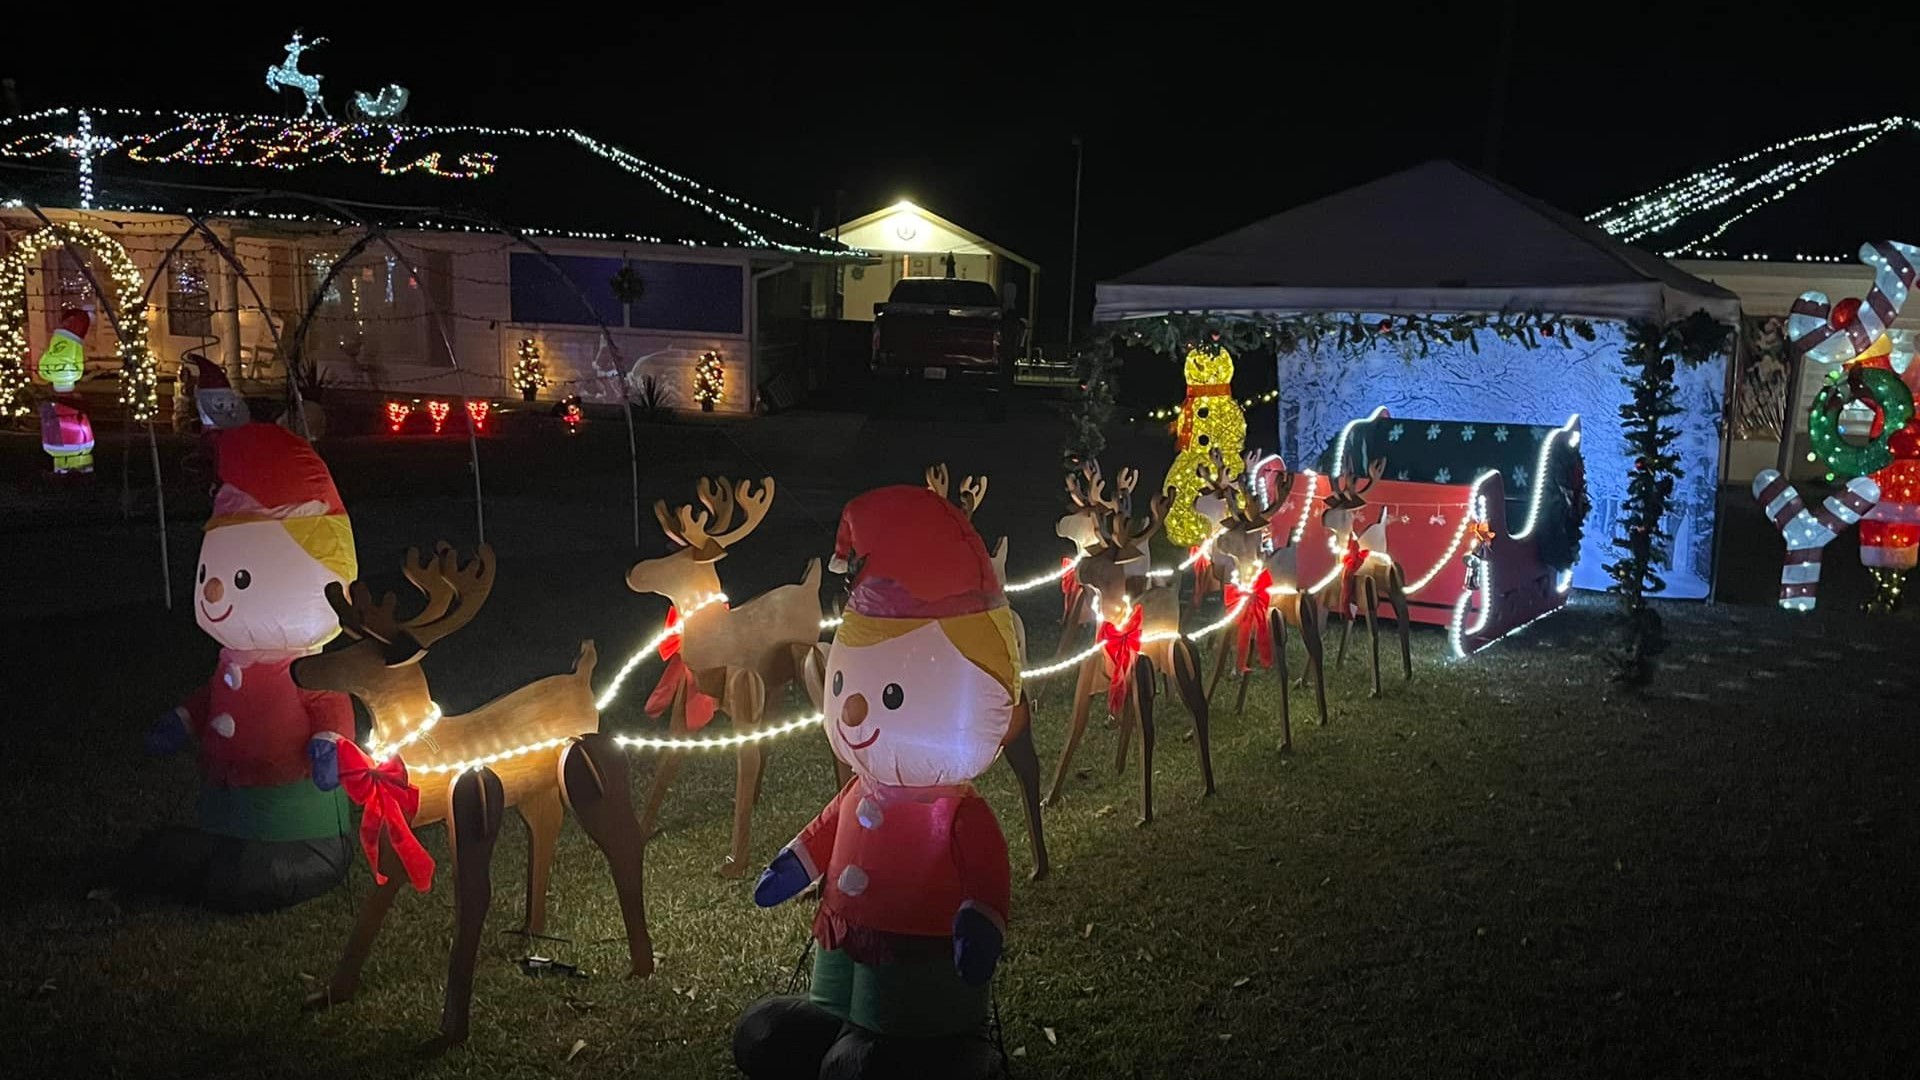 David Nichols loves Christmas and every year his display got bigger. But this year, a complaint led him to turn off his lights.